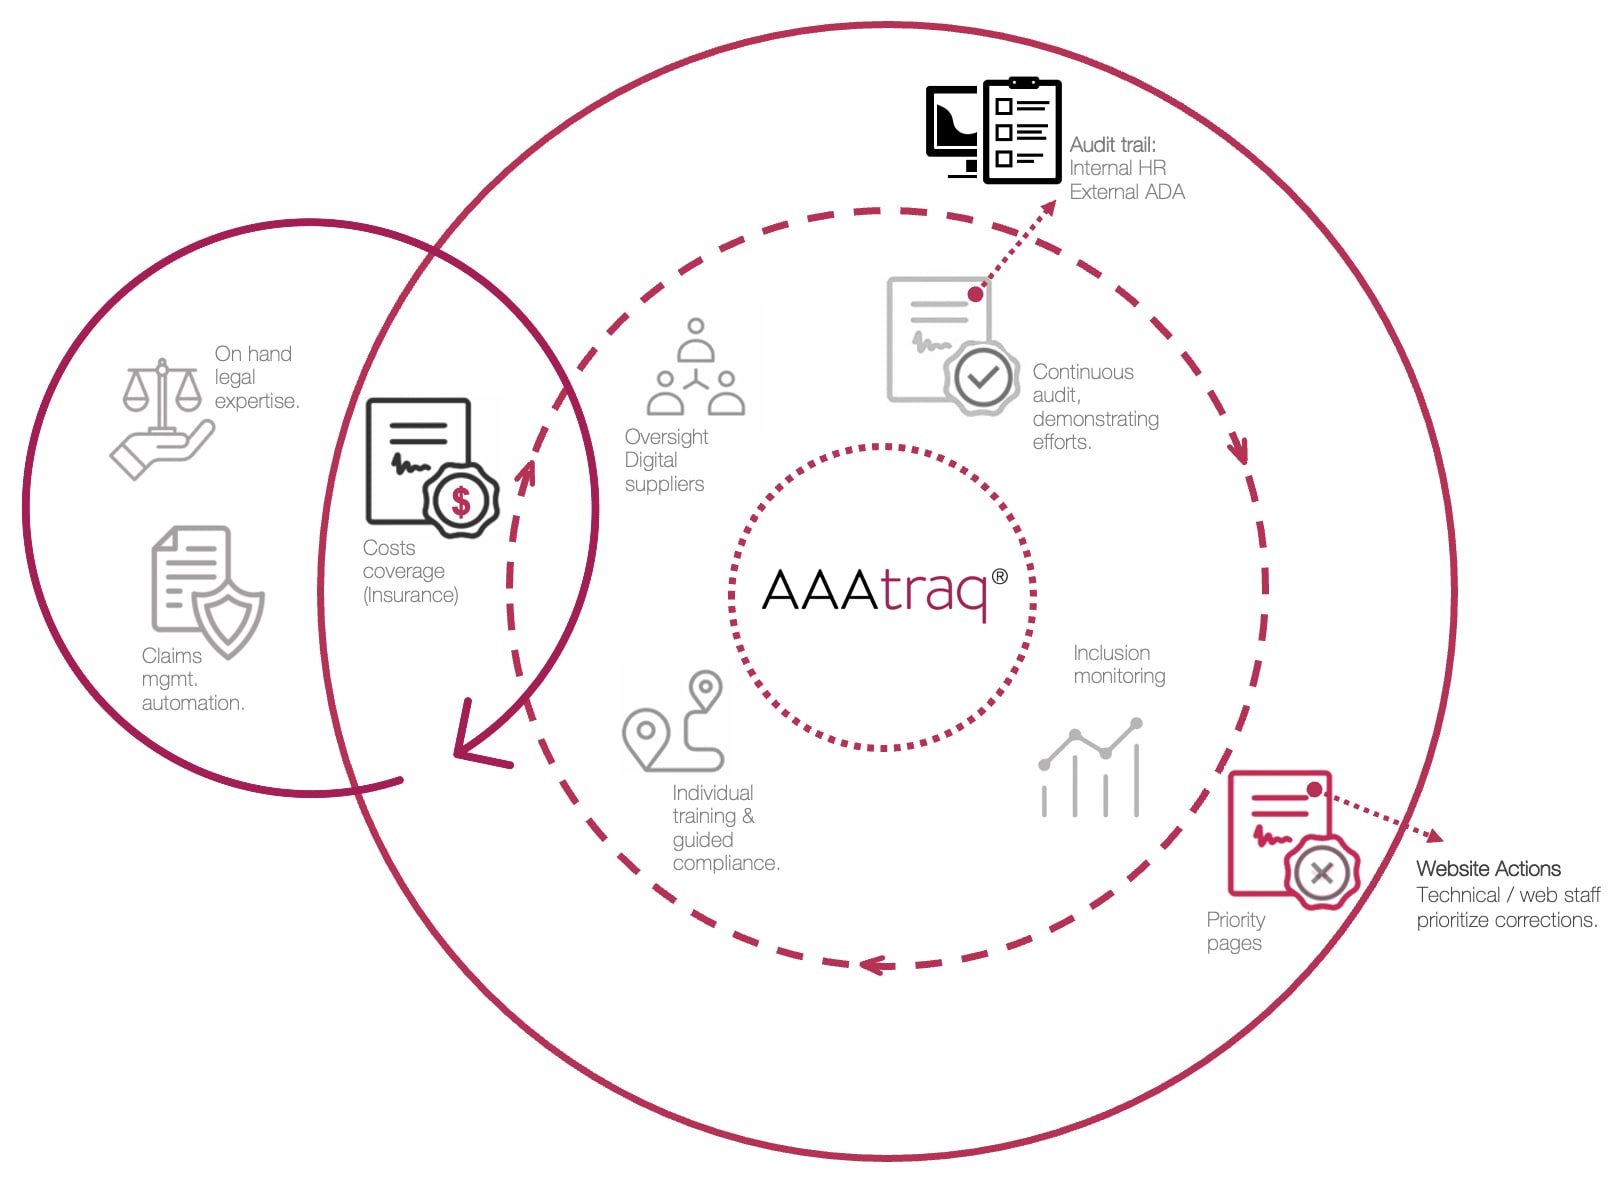 Venn diagram / info graphic showing the areas covered by the AAAtraq system.